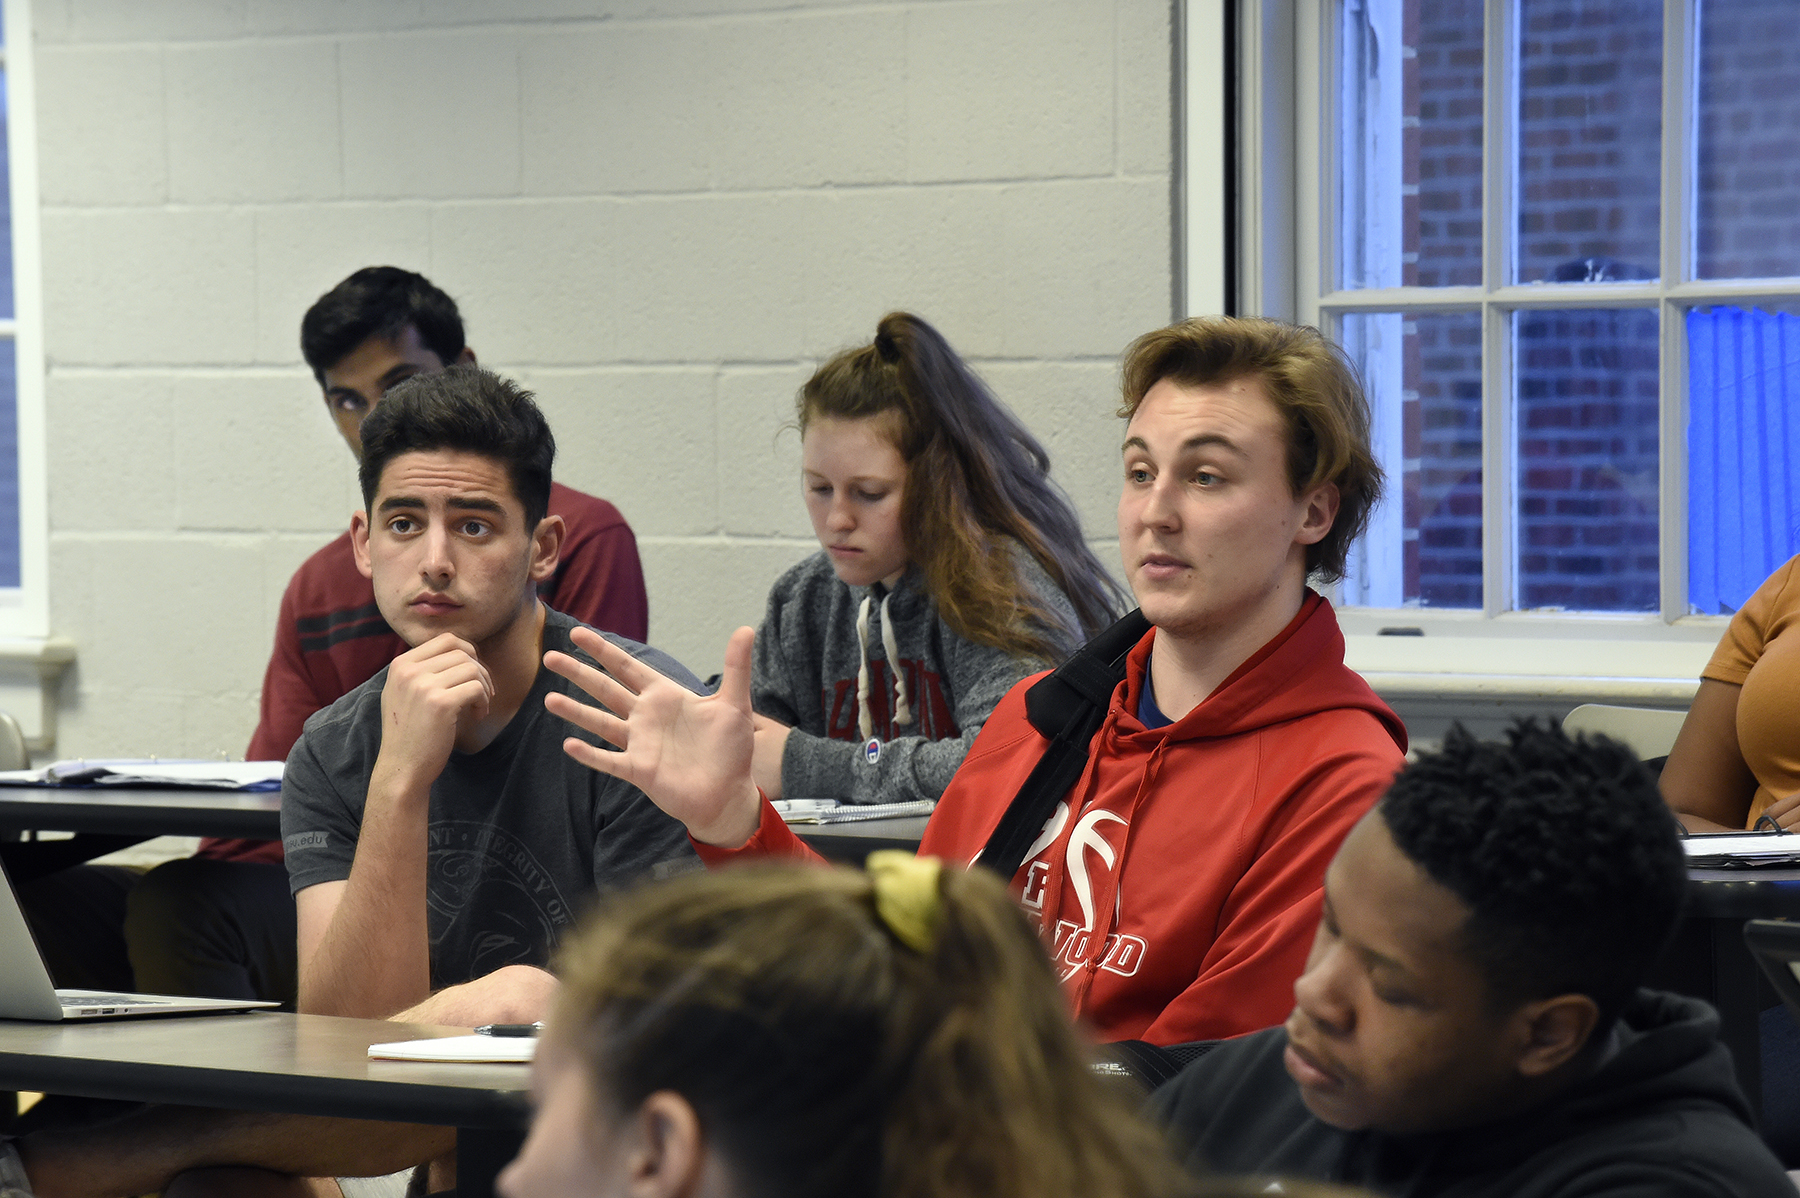 Lazar said he hopes that as a final takeaway, the course inspires students to become allies against hate speech, showing leadership both on campus and long after their time at Carolina. (photo by Donn Young). Photo shows students in class.